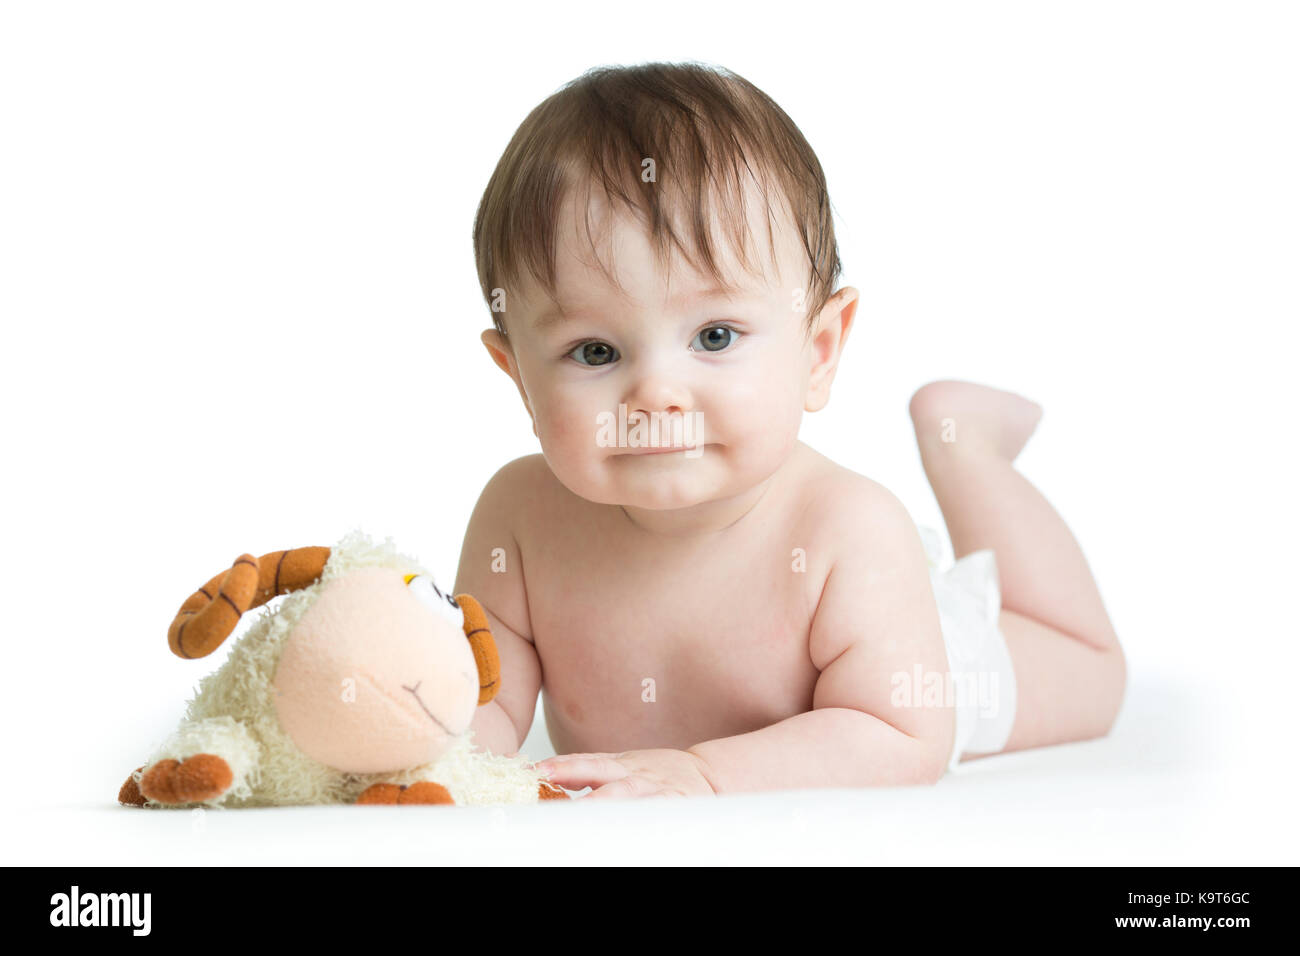 bright portrait of adorable baby Stock Photo